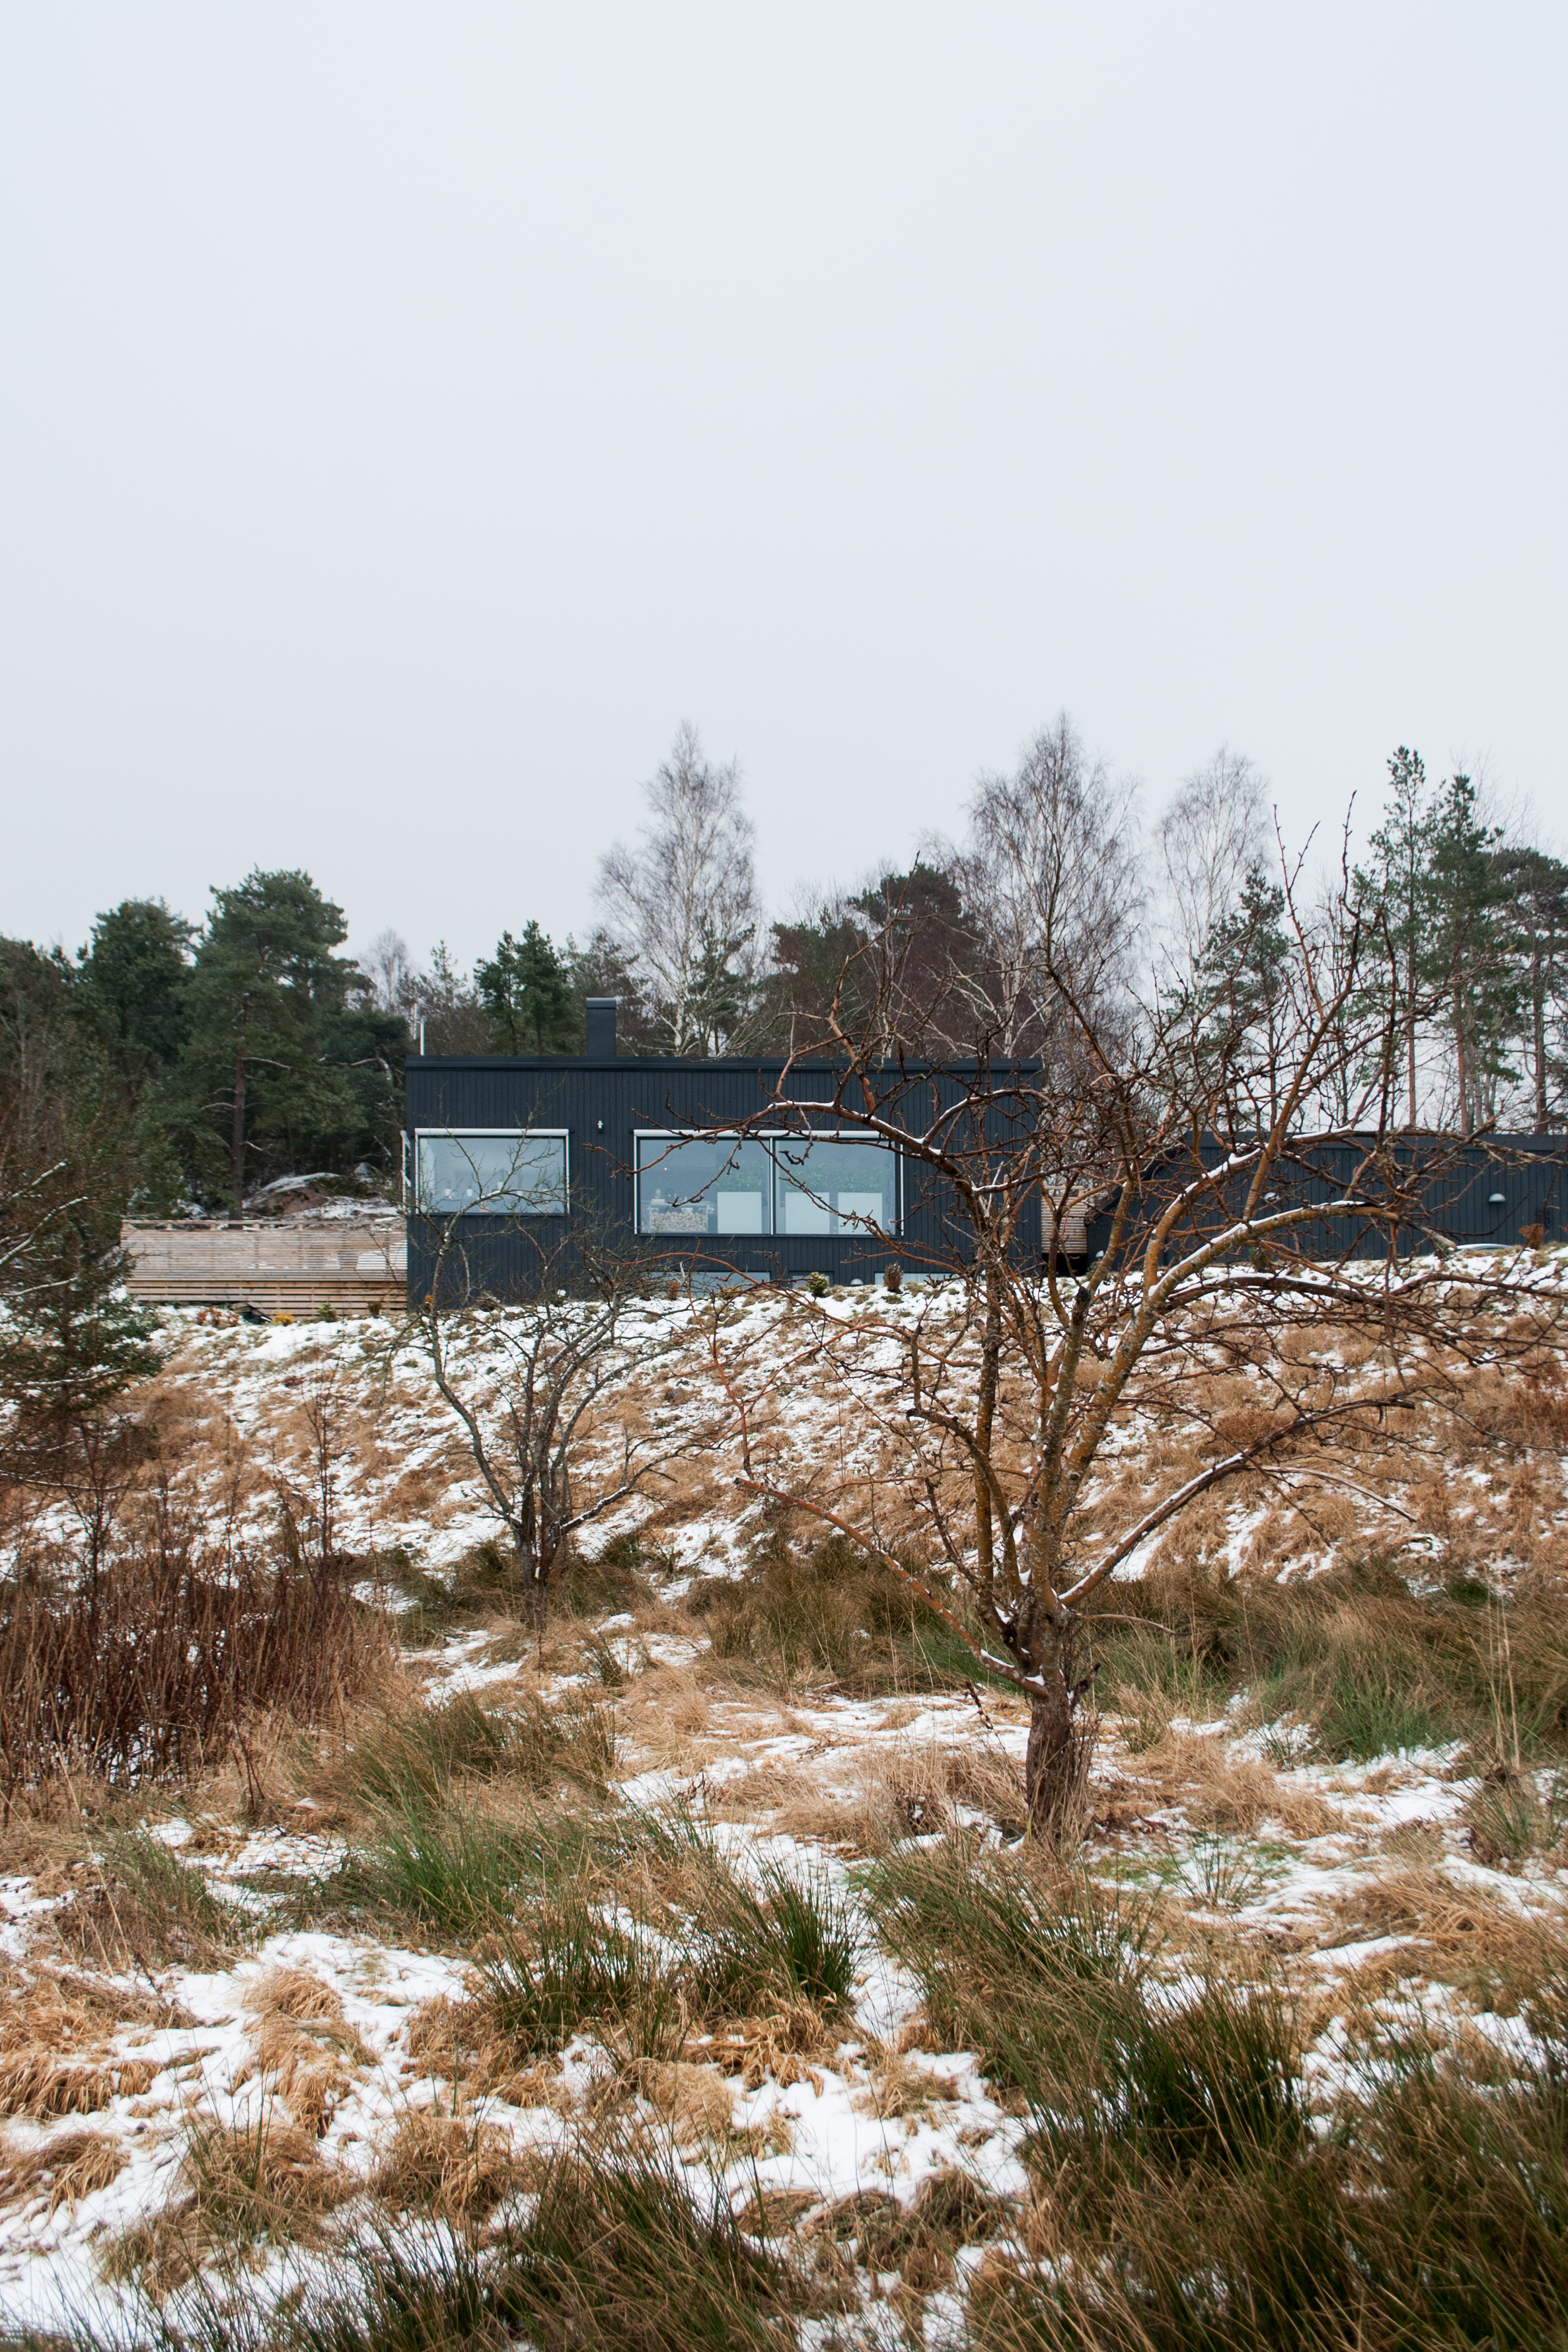  Situated on the outskirts of Gothenburg, this villa clings to a steep slope, incorporating the terrain within its layout. While at the front appearing large, clearly announcing itself from far away, the backside is low, private and cosy. 